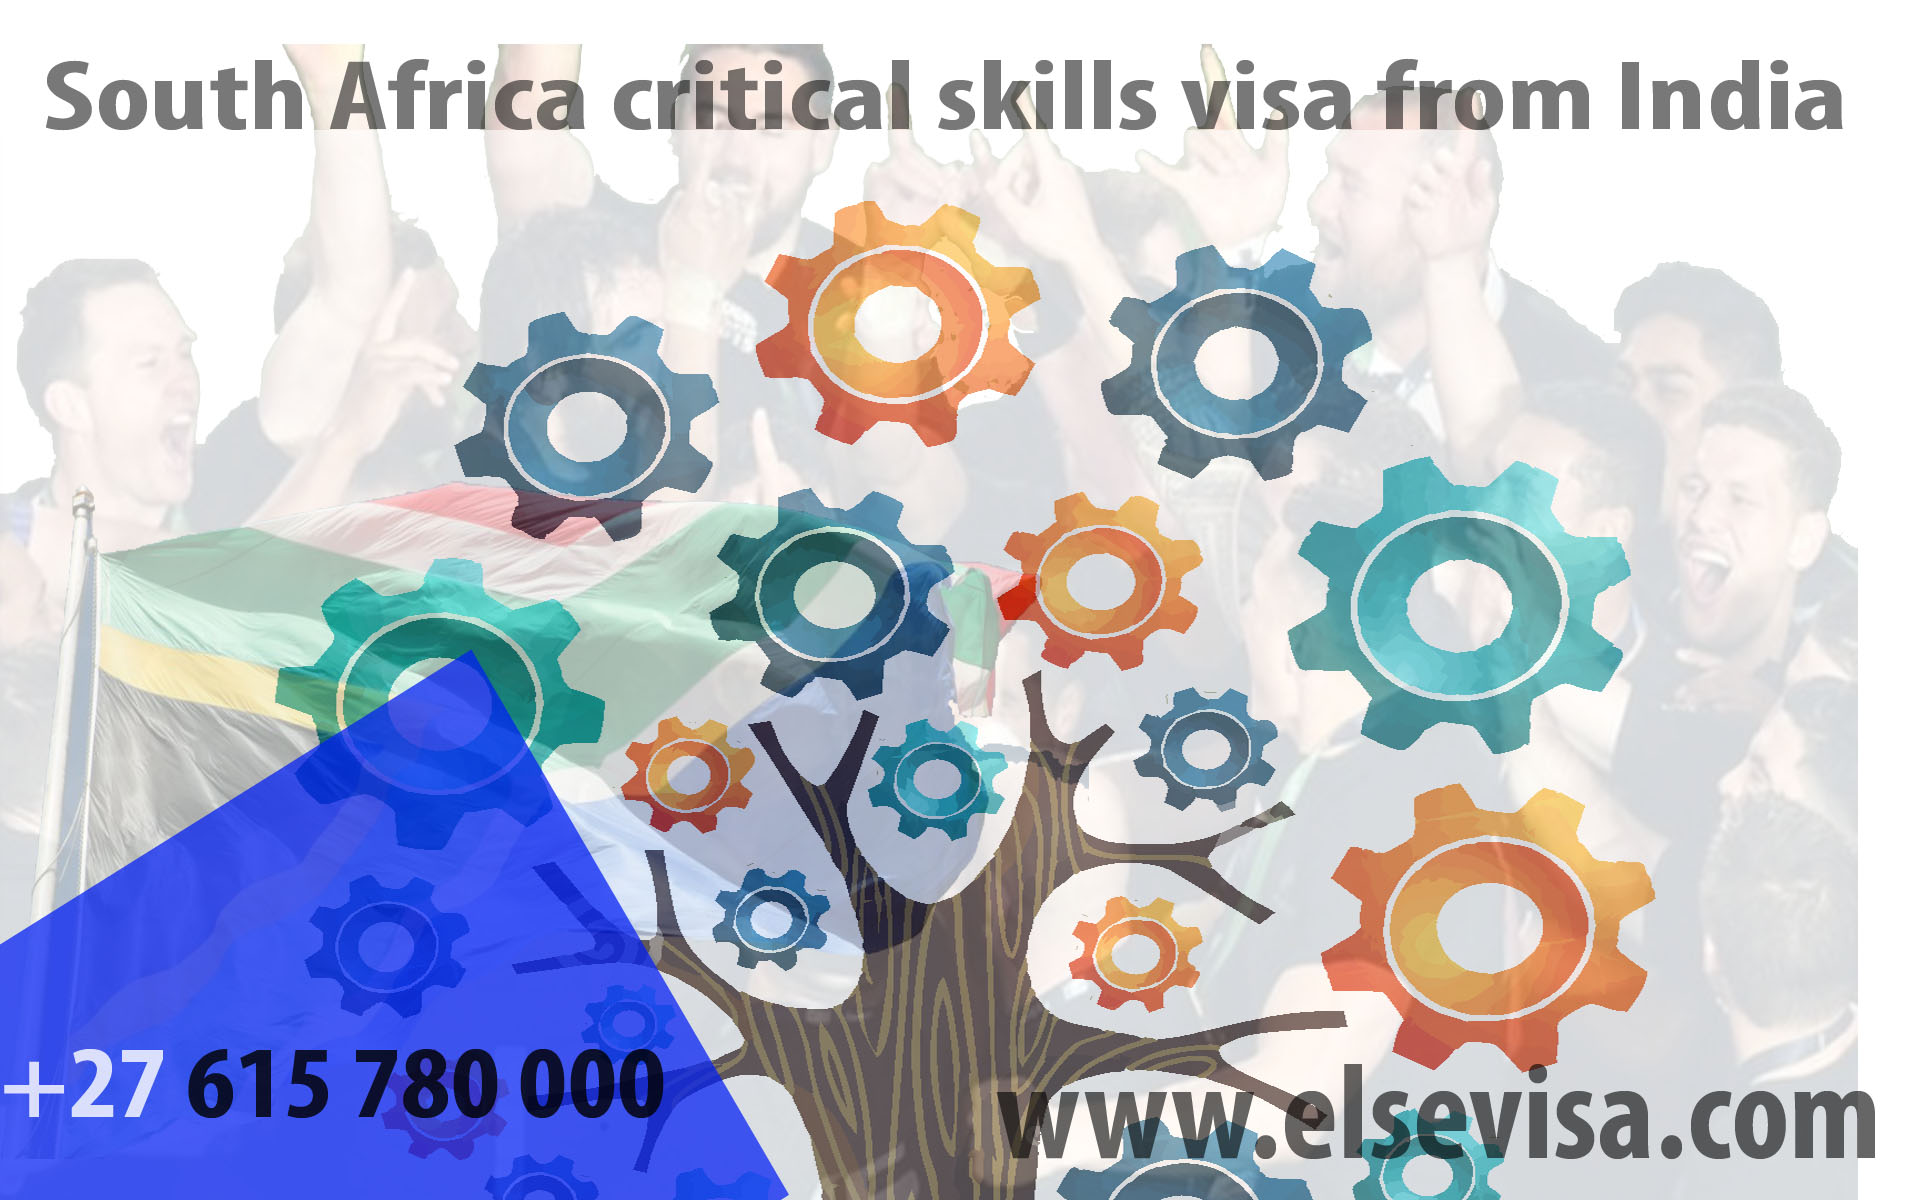 South Africa critical skills visa from India